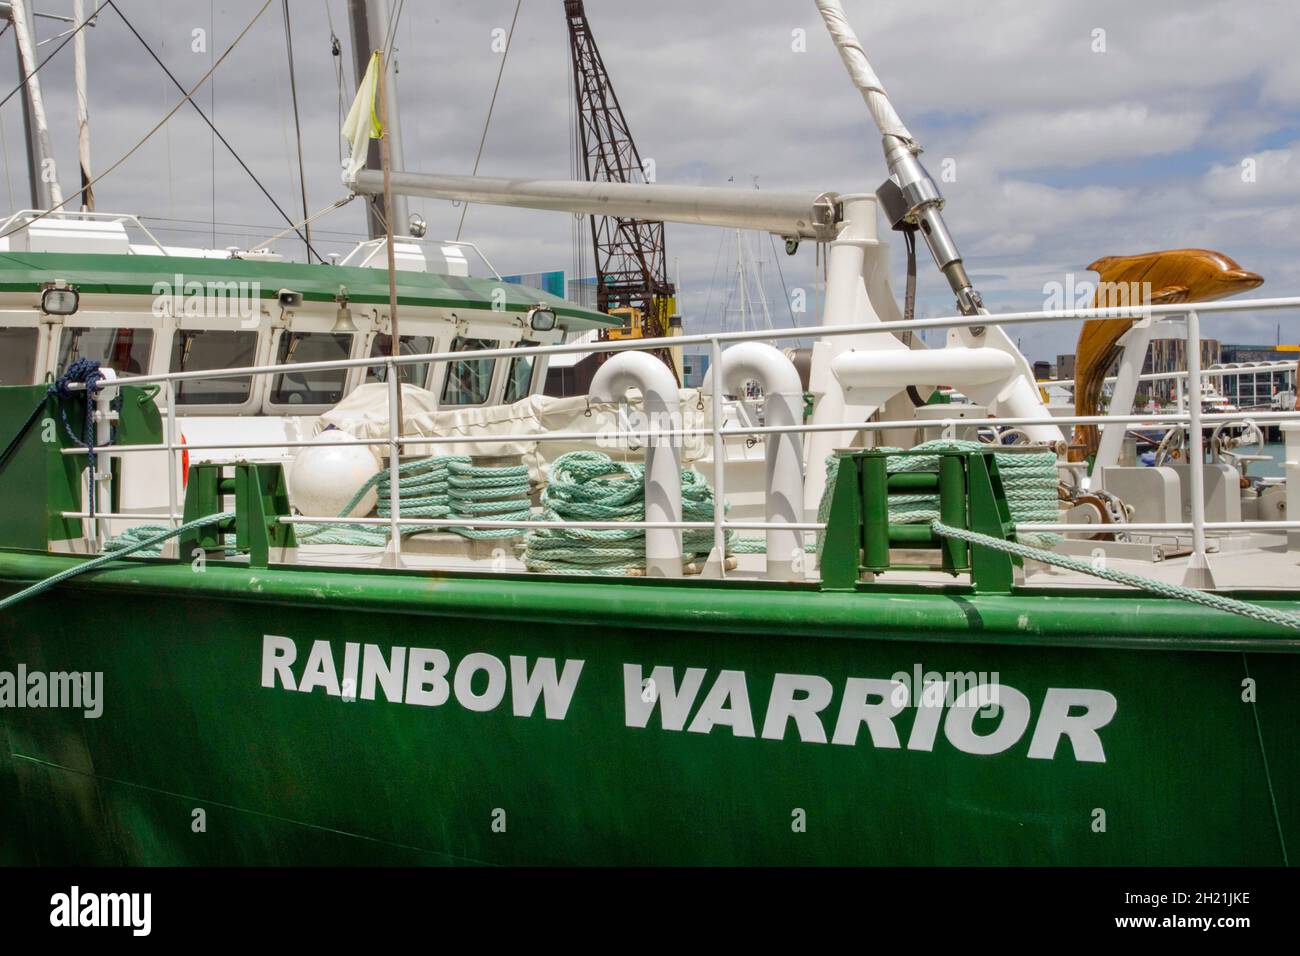 The new Rainbow Warrior, is the first purpose built ship, funded entirely by donations for Greenpeace, arrives in the Waitemata Harbour where the original vessel was bombed in 1985 by the French intelligence service, Auckland, New Zealand, Friday, January 11, 2013. Stock Photo